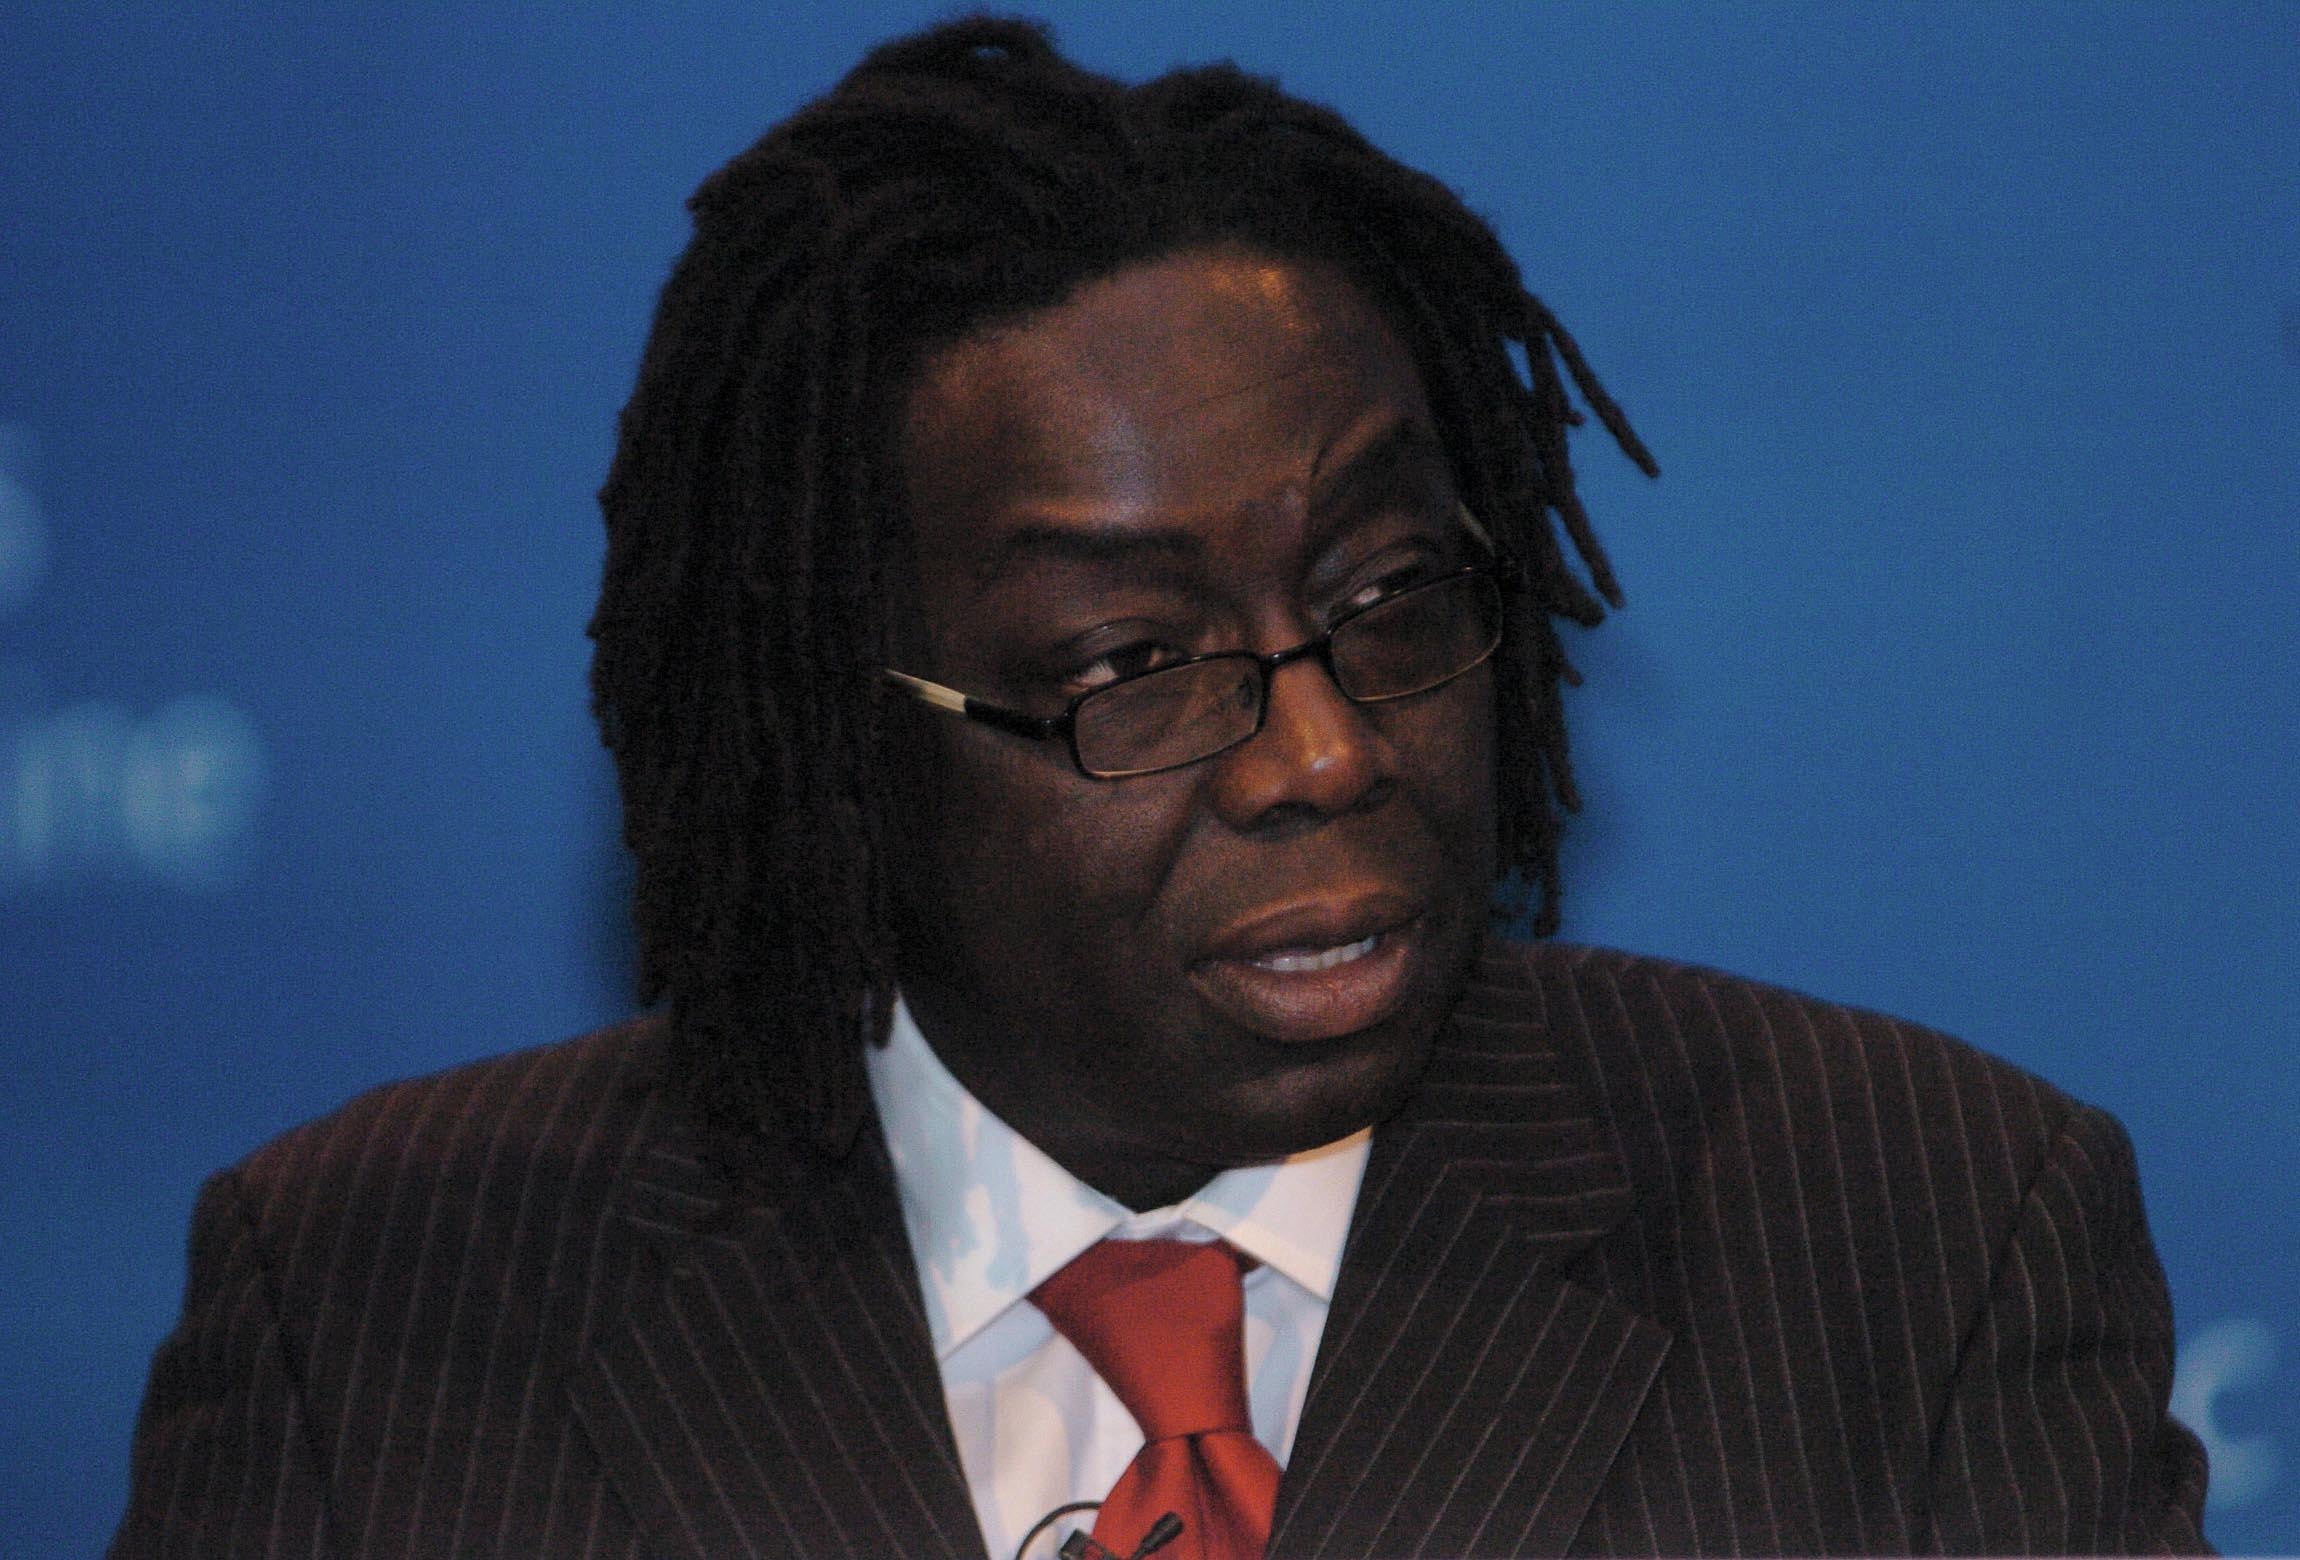 Victor Adebowale was among the guests on the panel